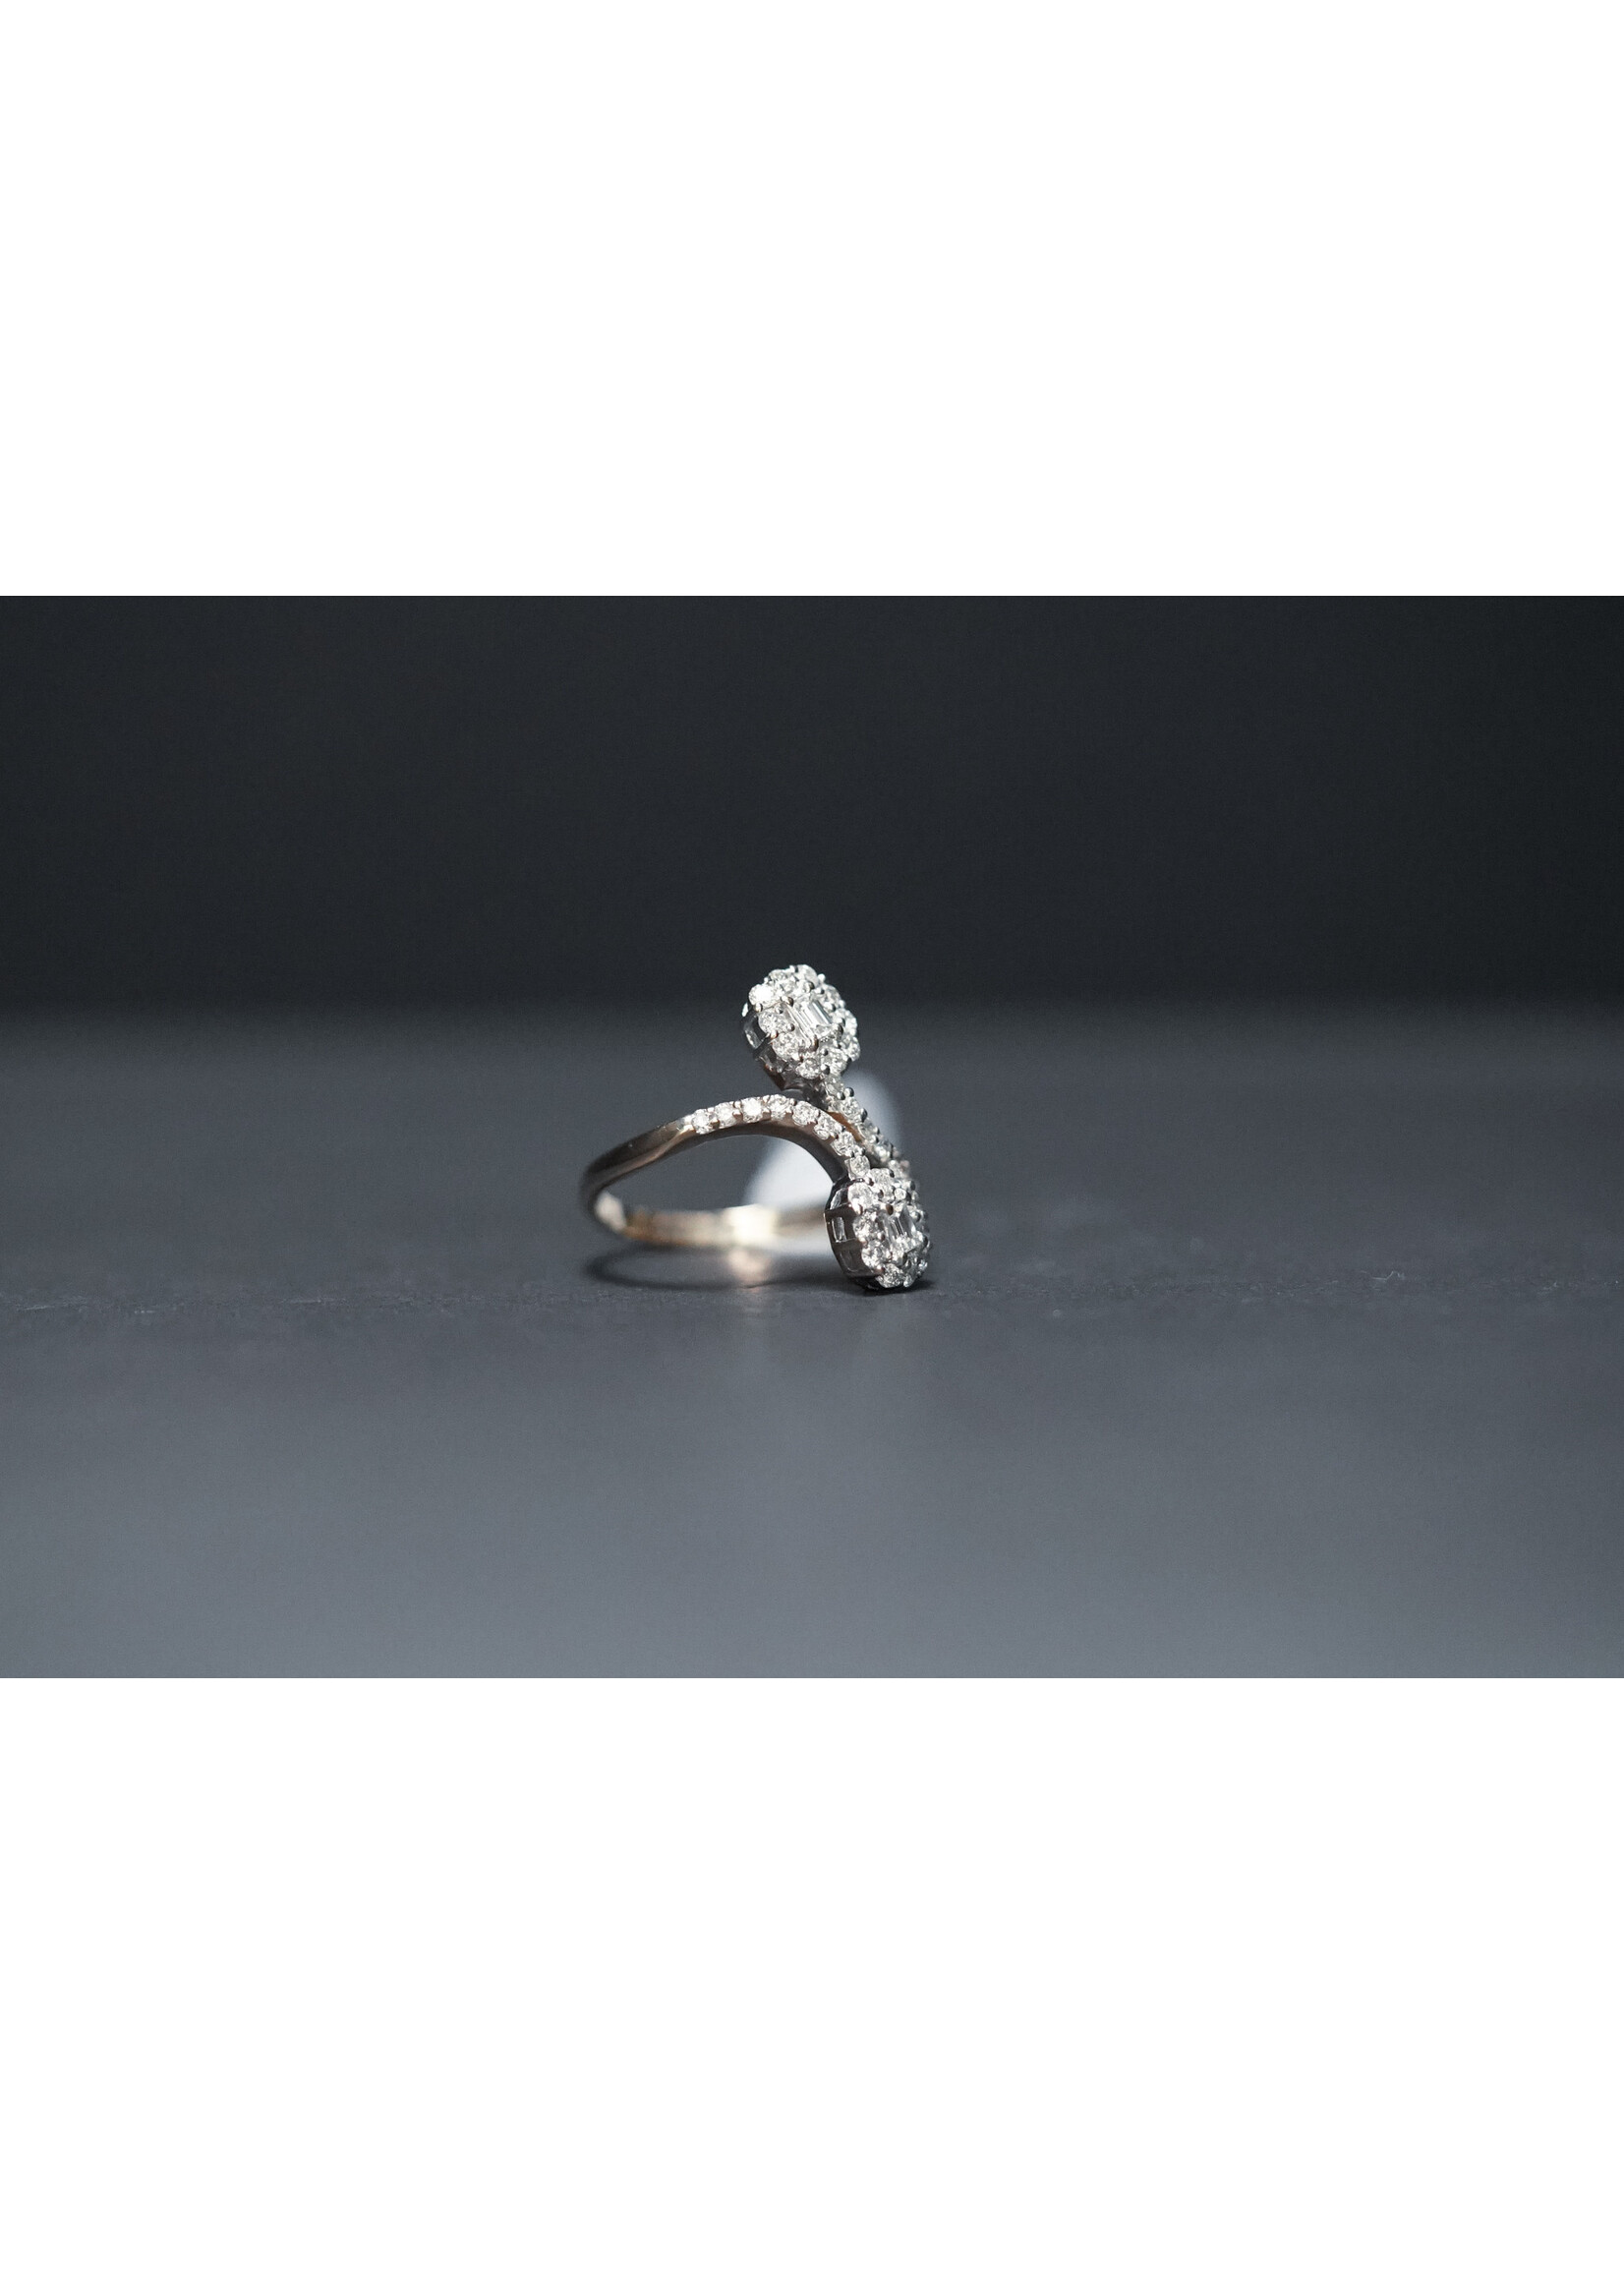 14KY 4.4g 1.50ctw Diamond Bypass Fashion Ring (size 8)